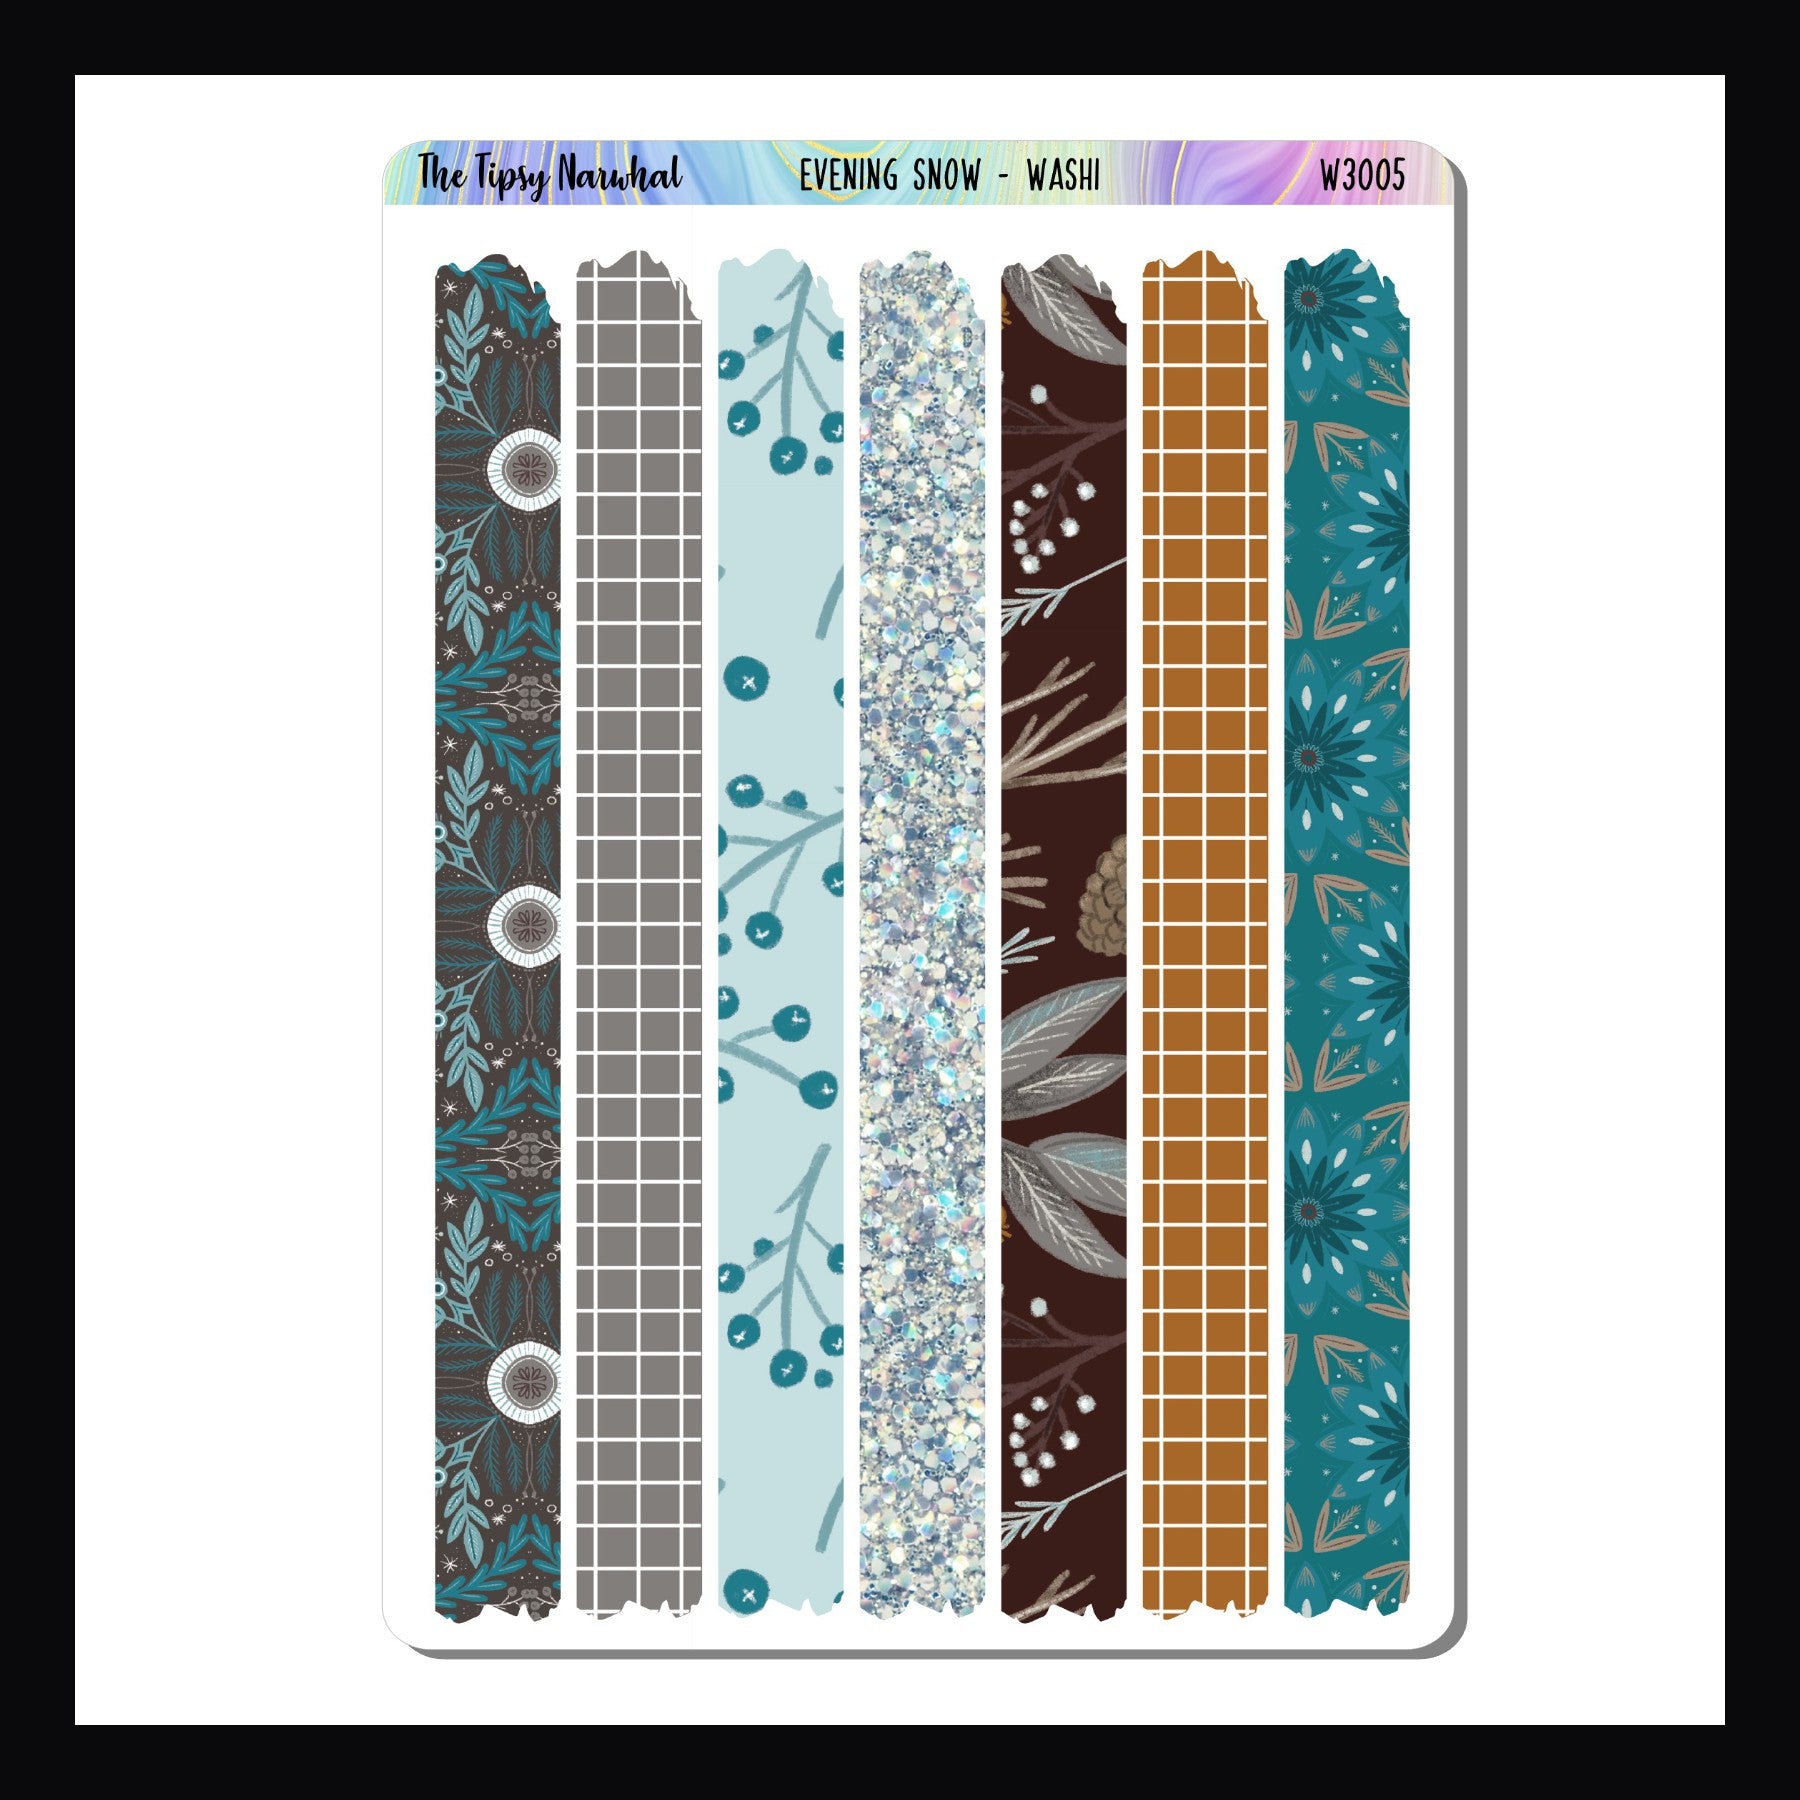 Evening Snow Washi Sheet.  Sheet features 7 strips of washi stickers, each strip coordinates perfectly with the Evening Snow sticker kits.